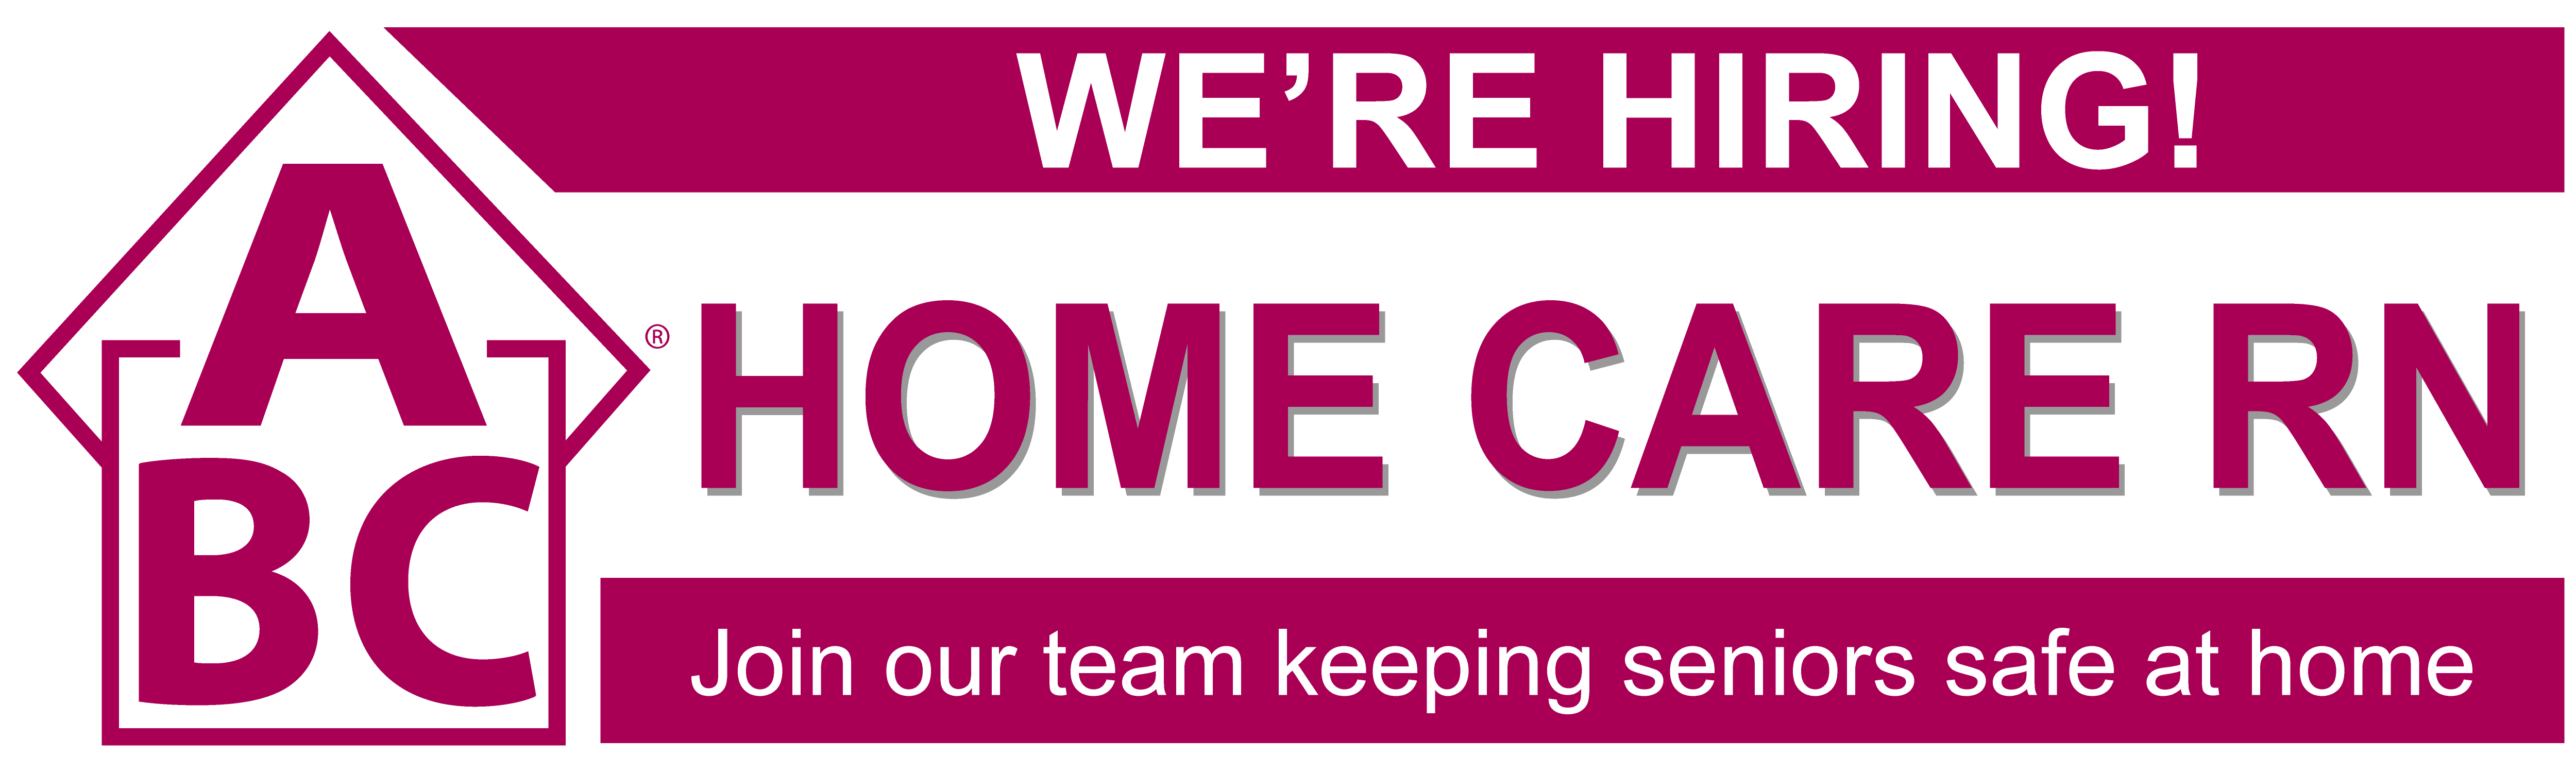 Home Care RN - Now Hiring